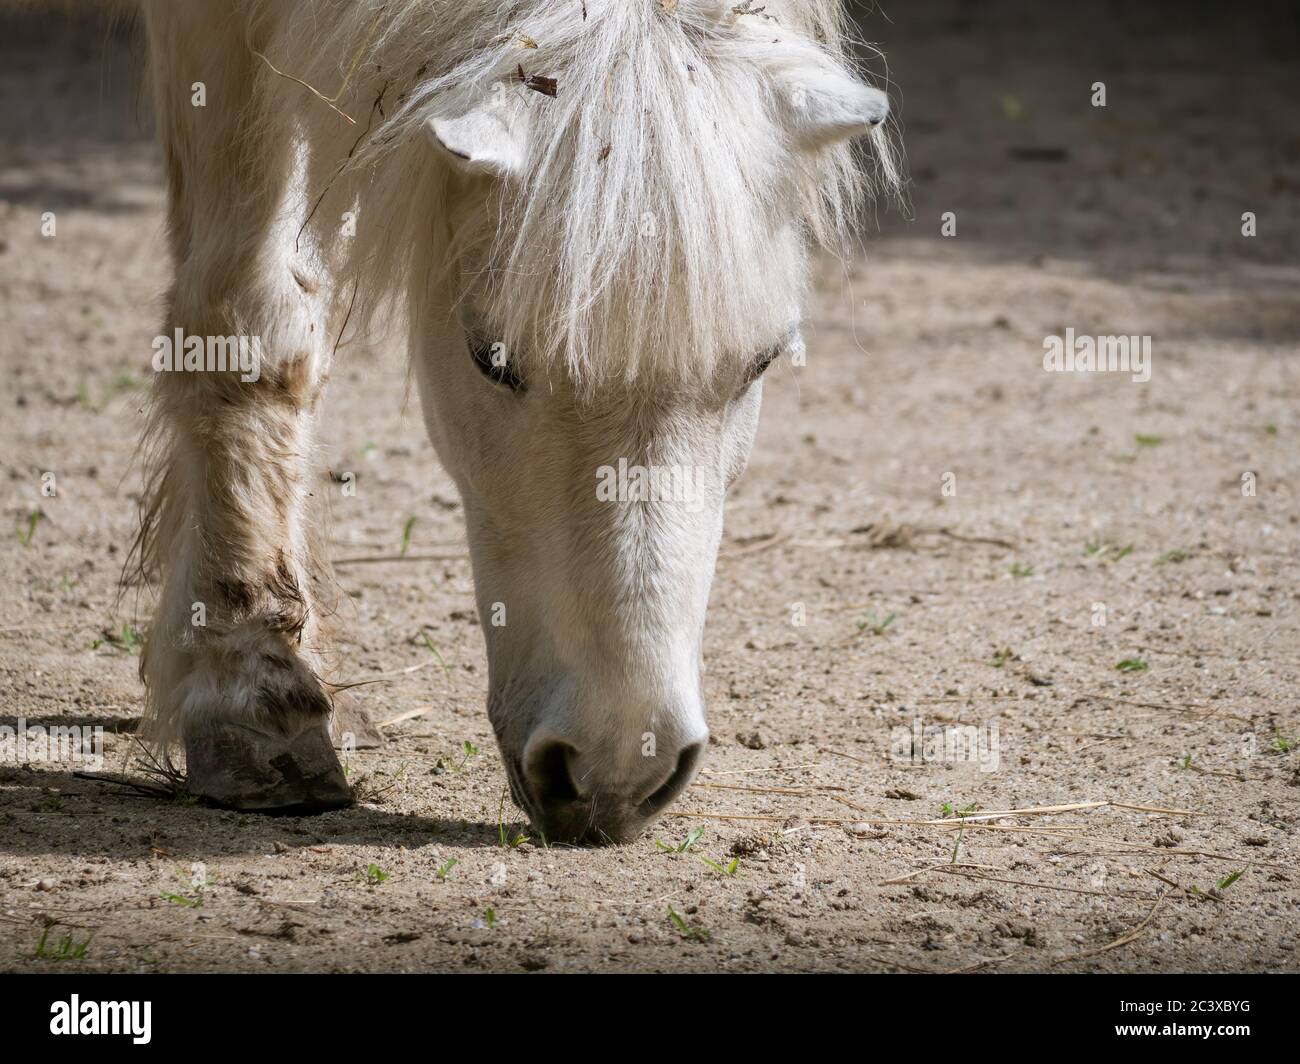 White pony or small horse Equus ferus caballus looking for food on the ground. Stock Photo